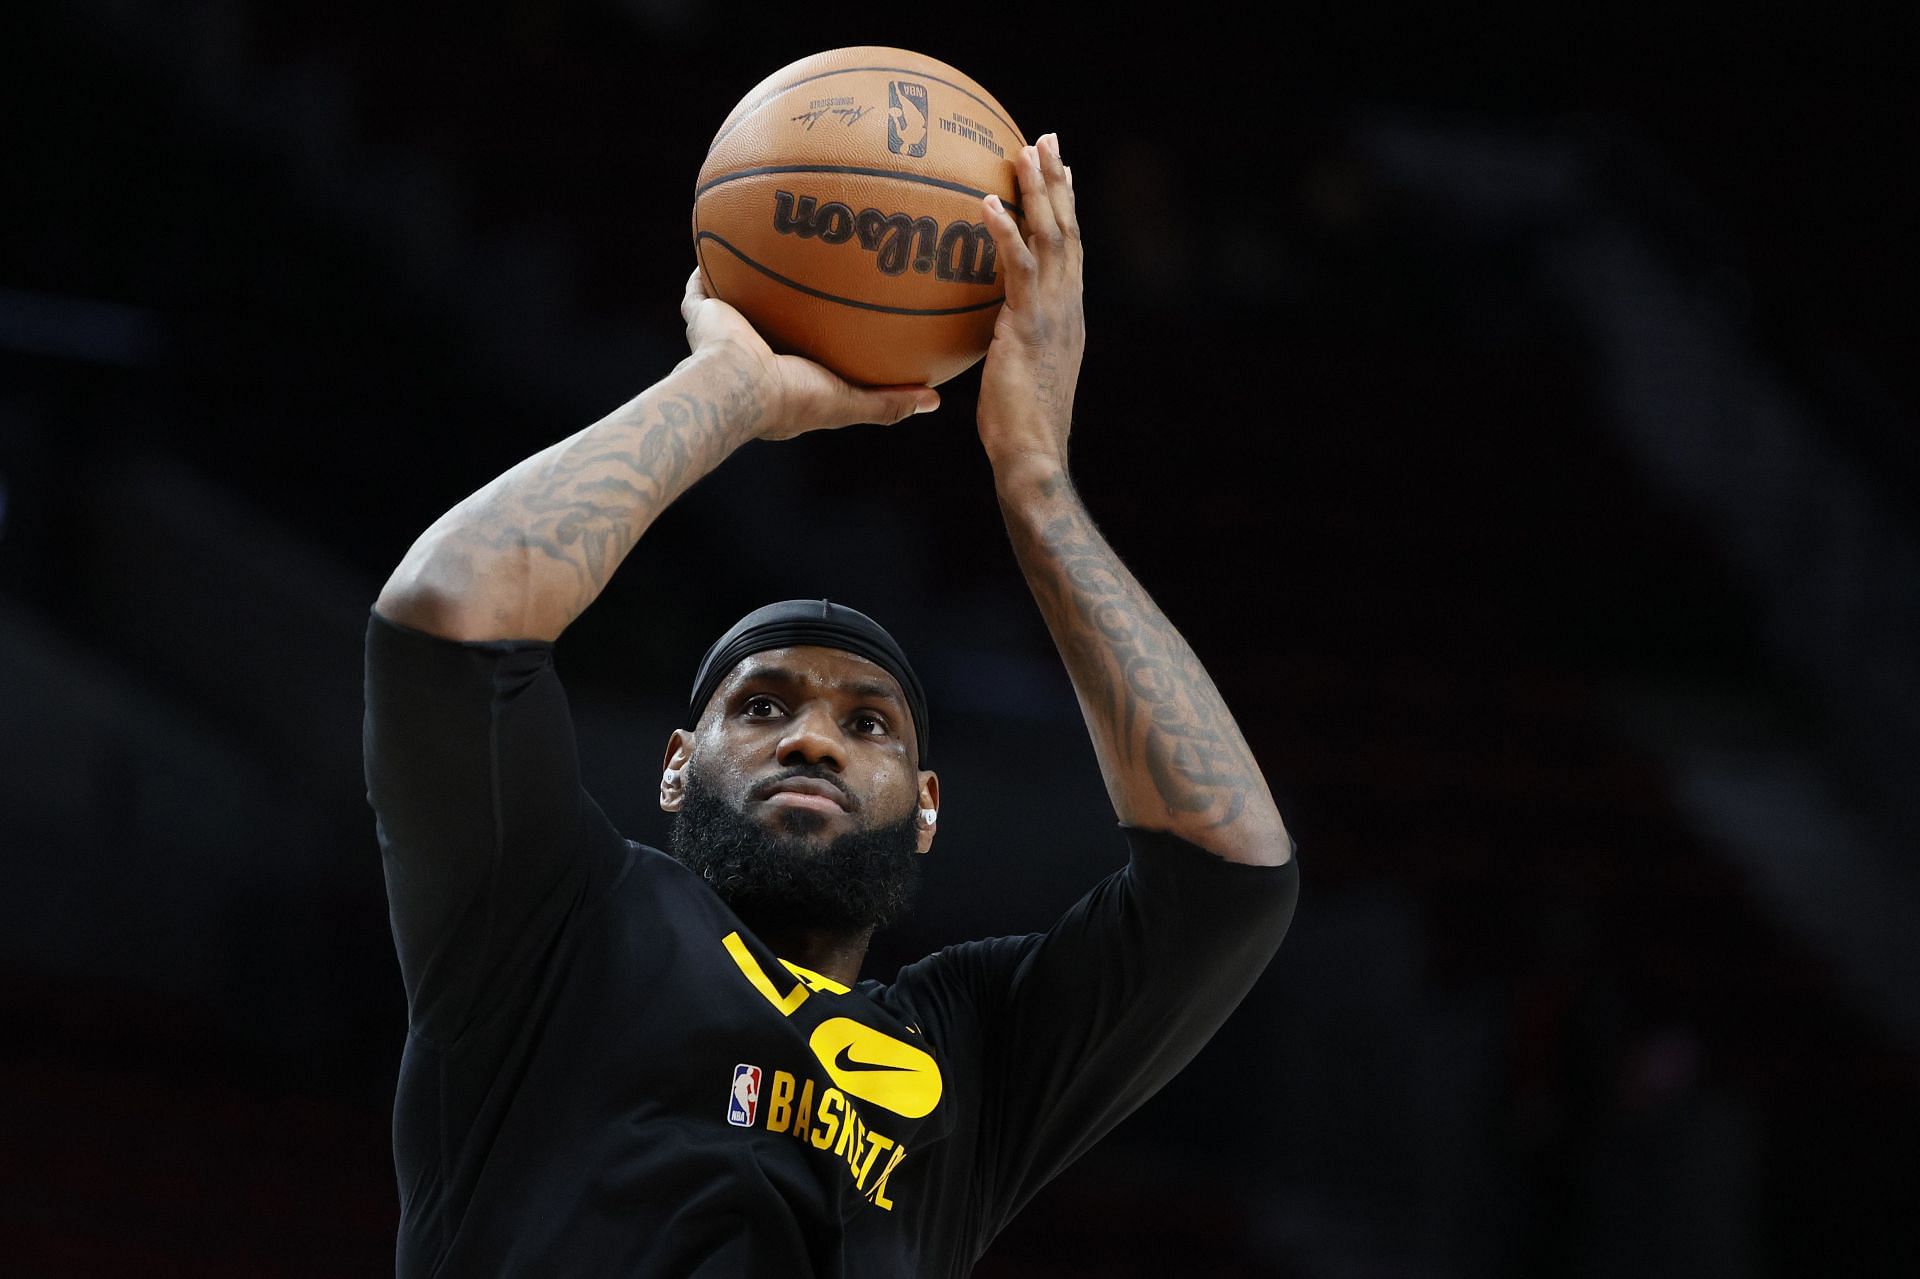 LA Lakers superstar LeBron James is in his 19th season.